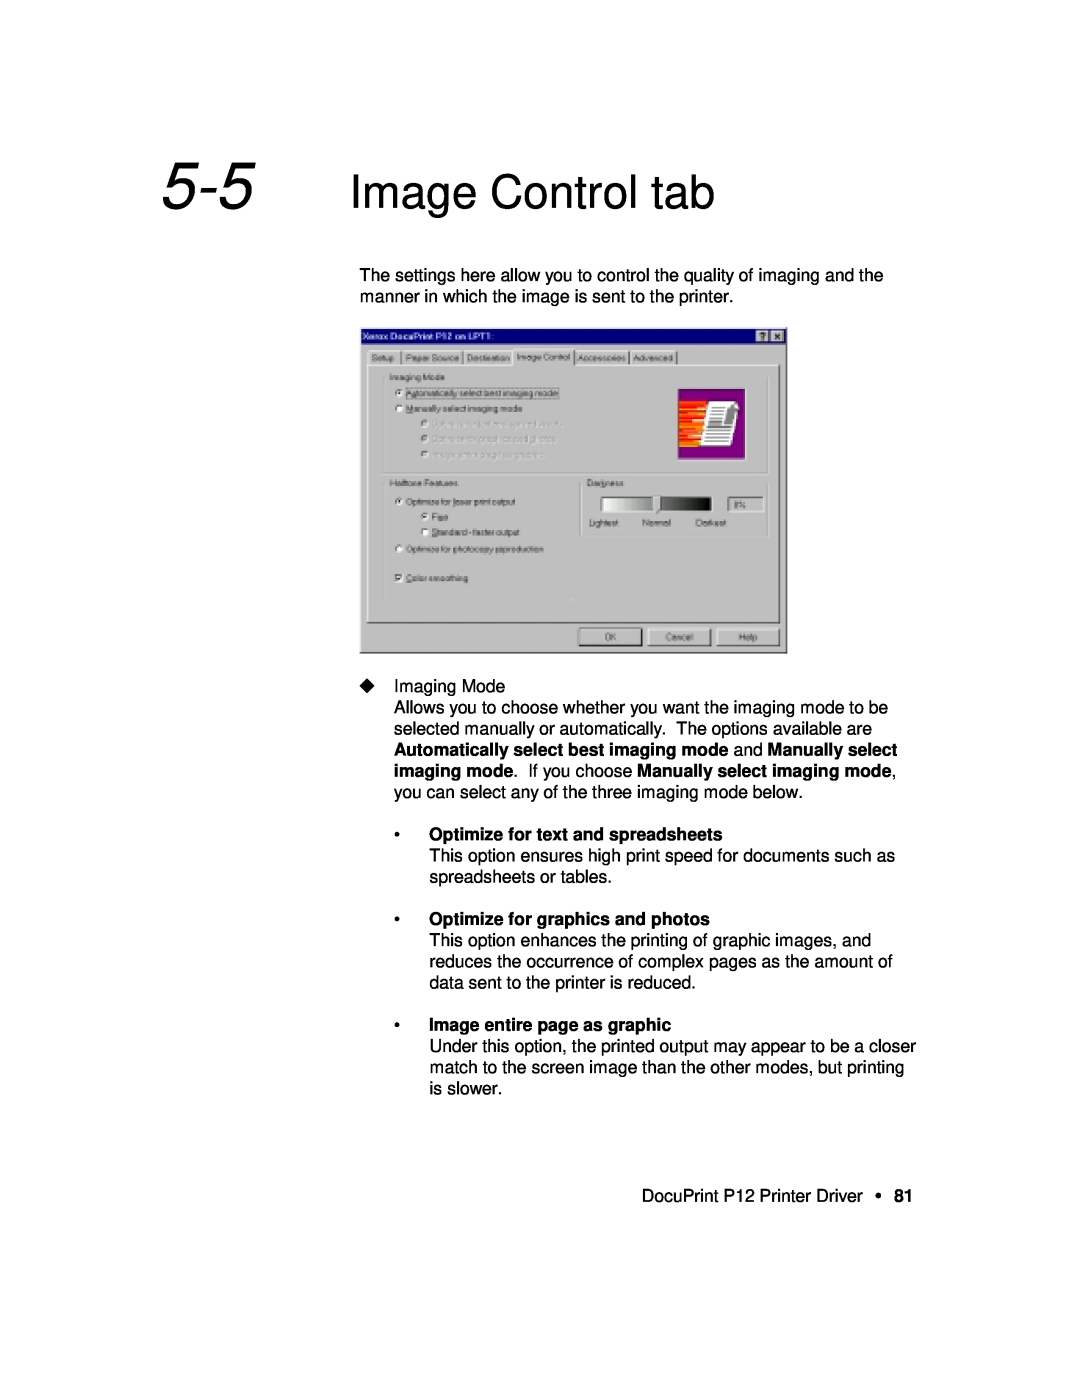 Xerox P12 manual Image Control tab, Optimize for text and spreadsheets, Optimize for graphics and photos 